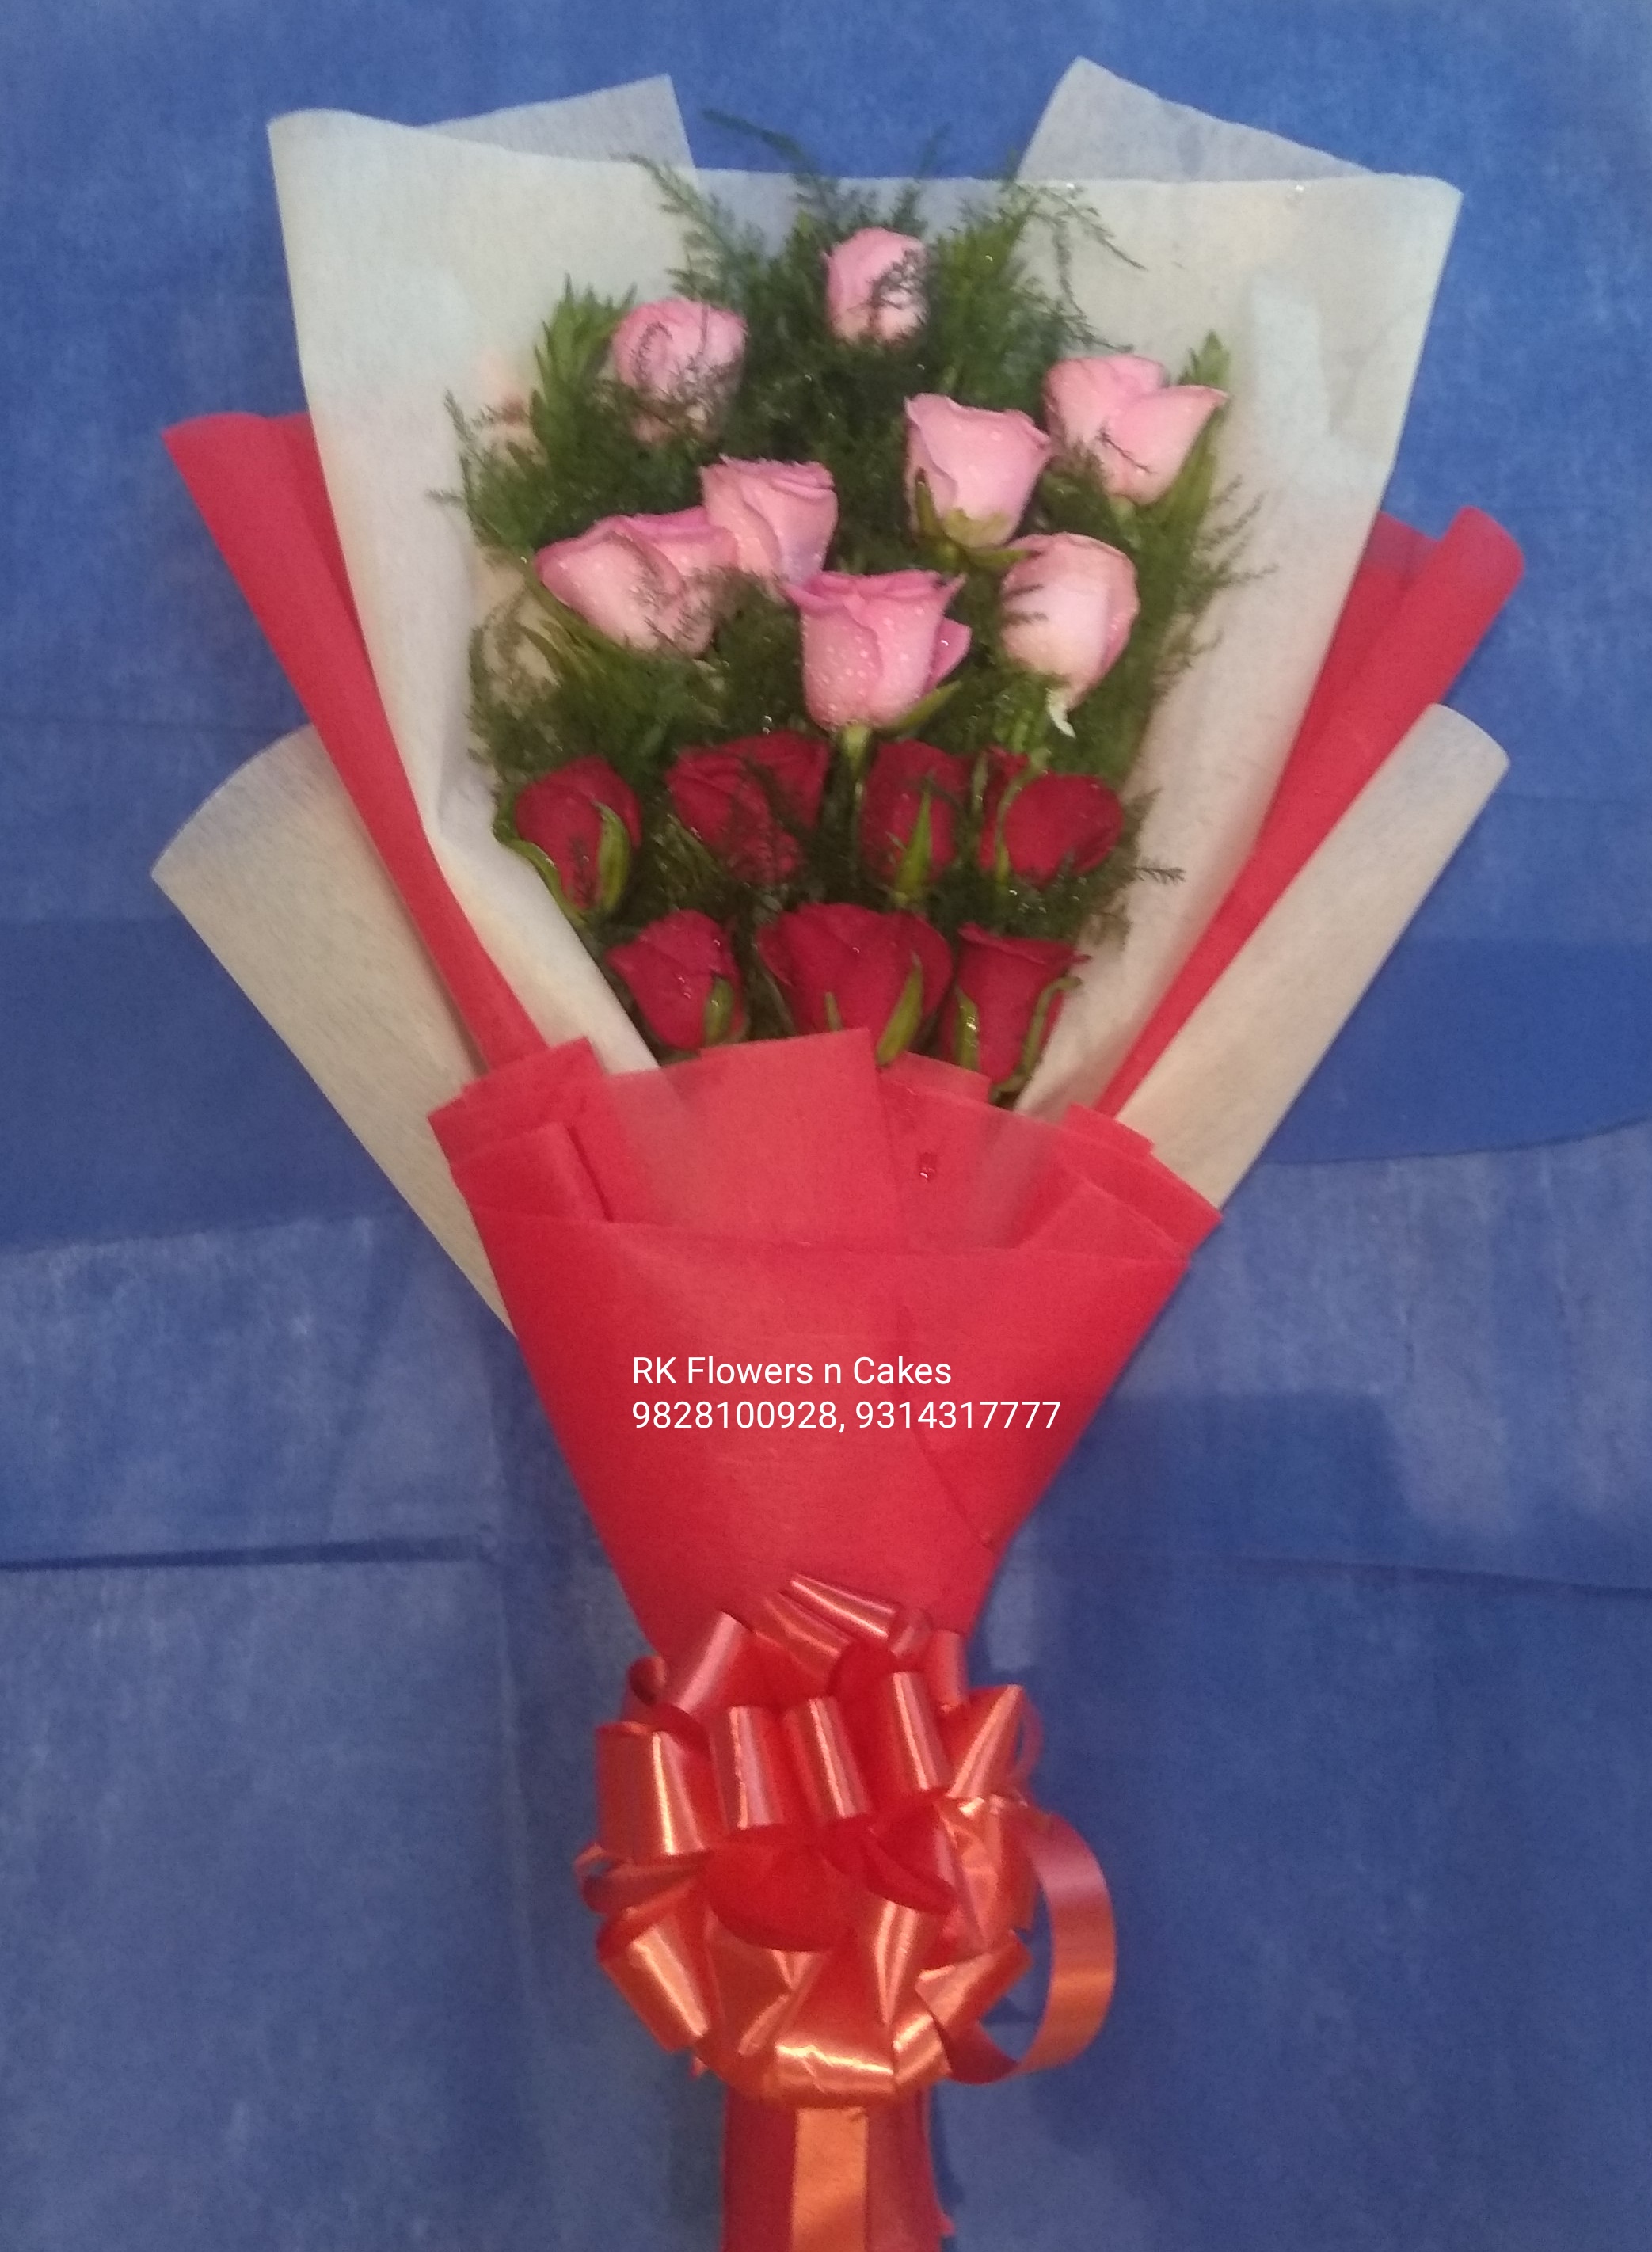 Red & Pink Roses Bunch